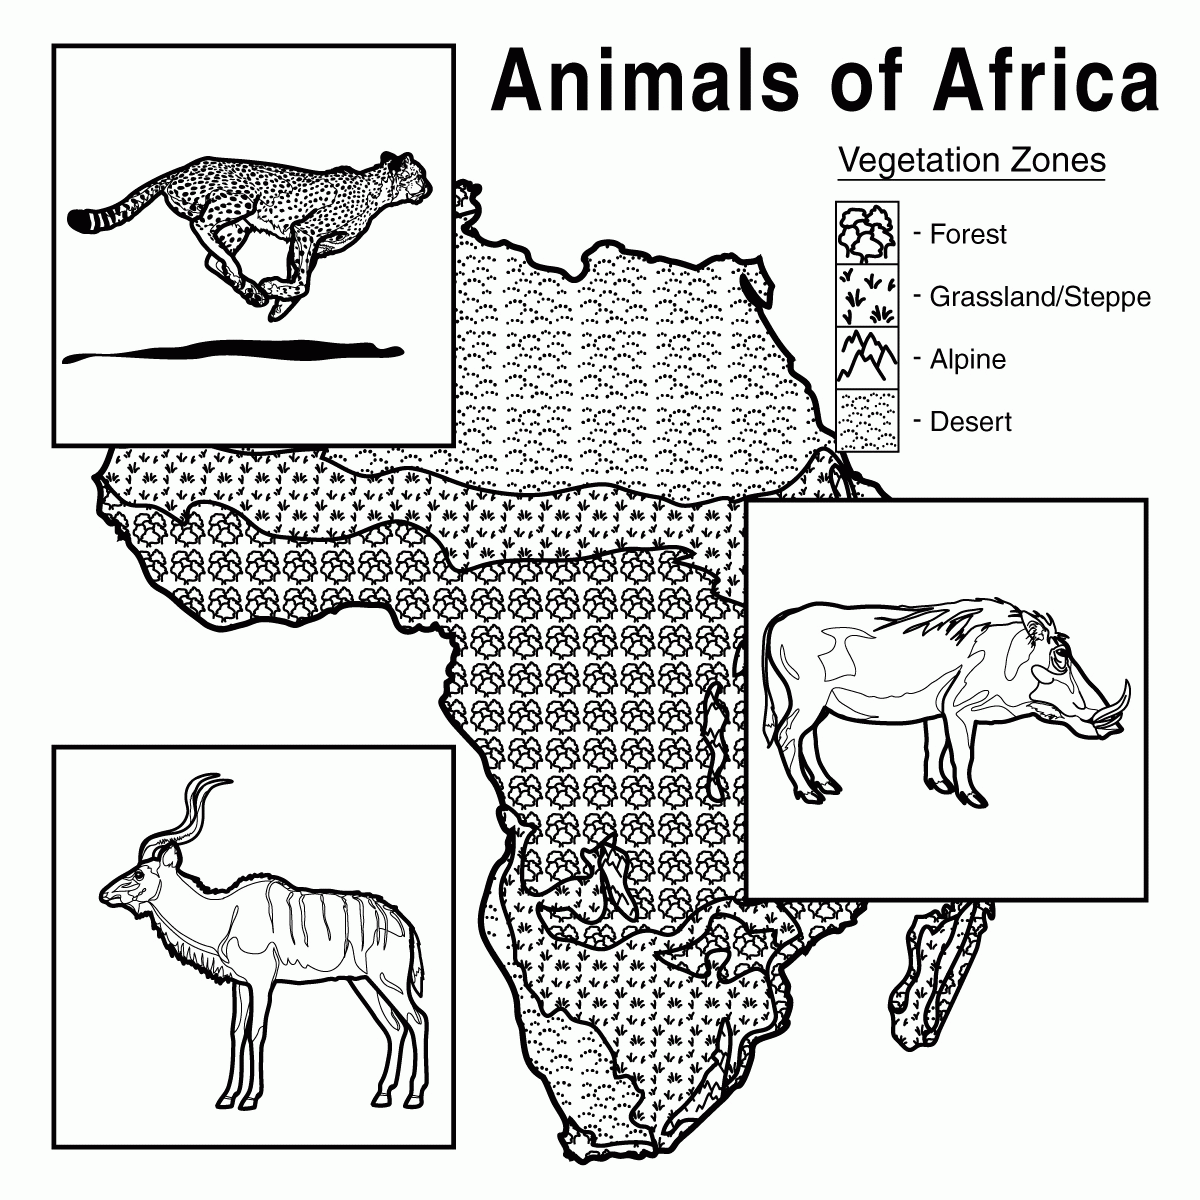 Free Coloring Page African Animals, Download Free Coloring Page African